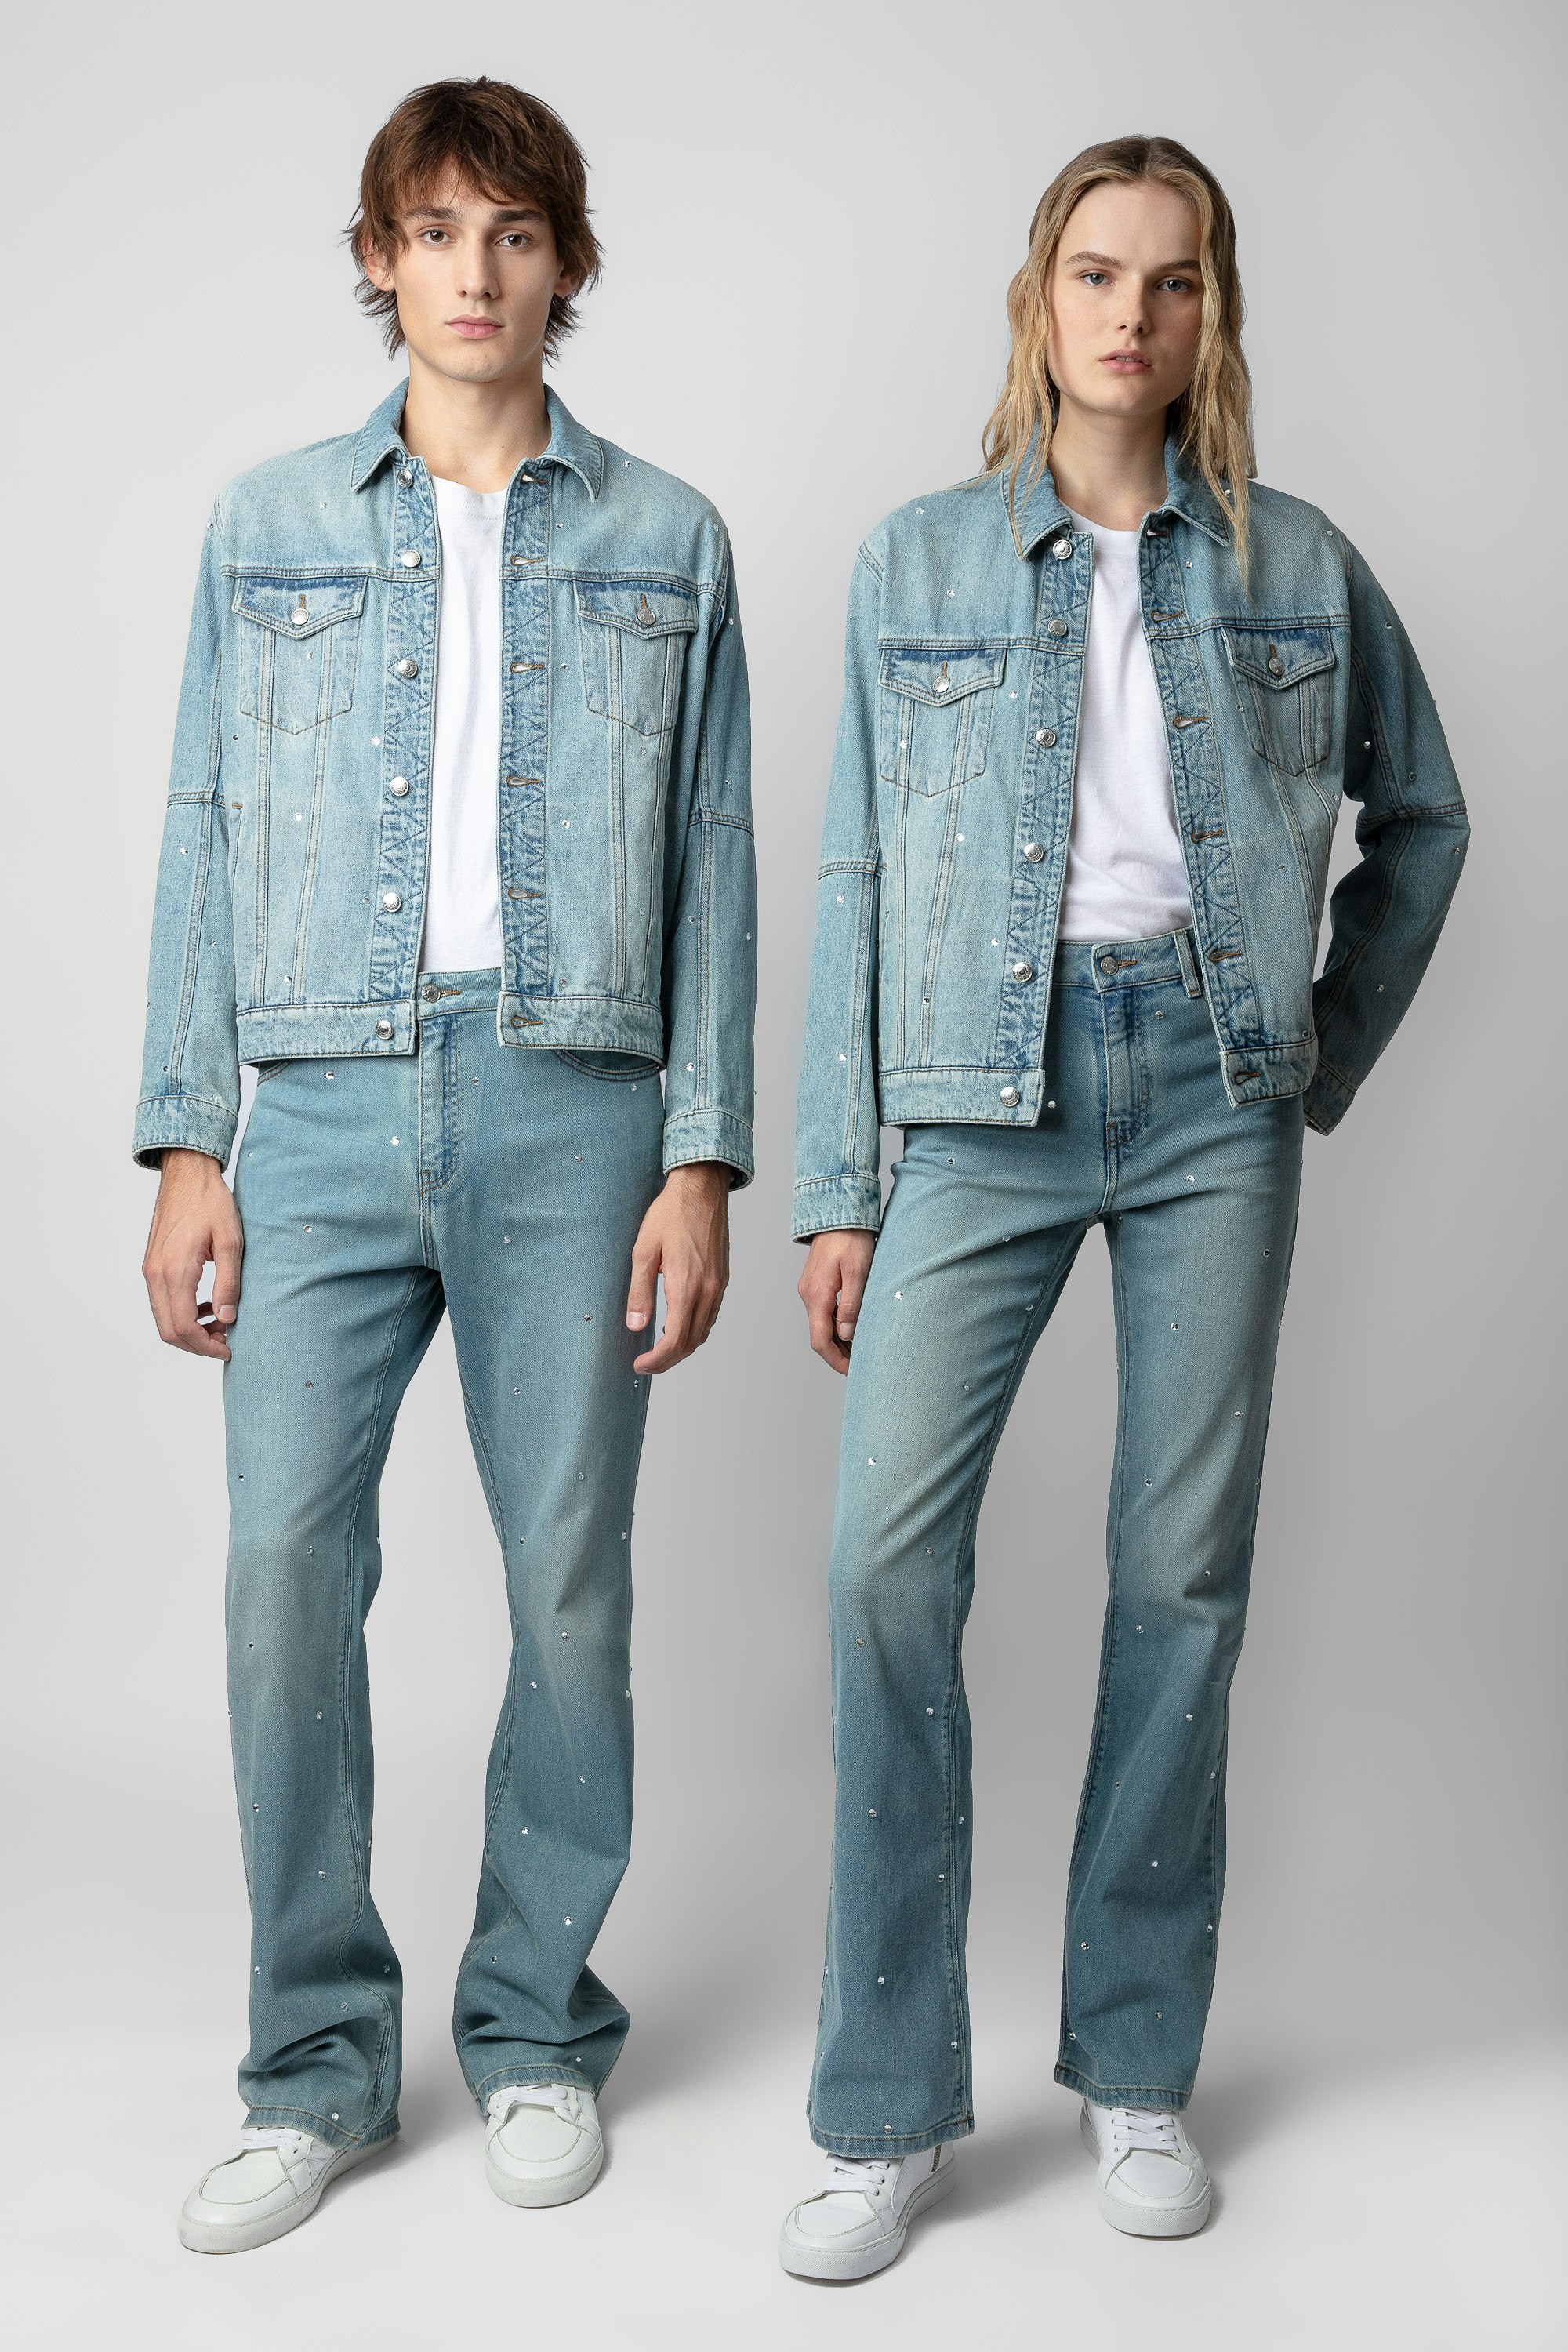 Jeans Emile Strass - Jeans larghi in denim con strass.